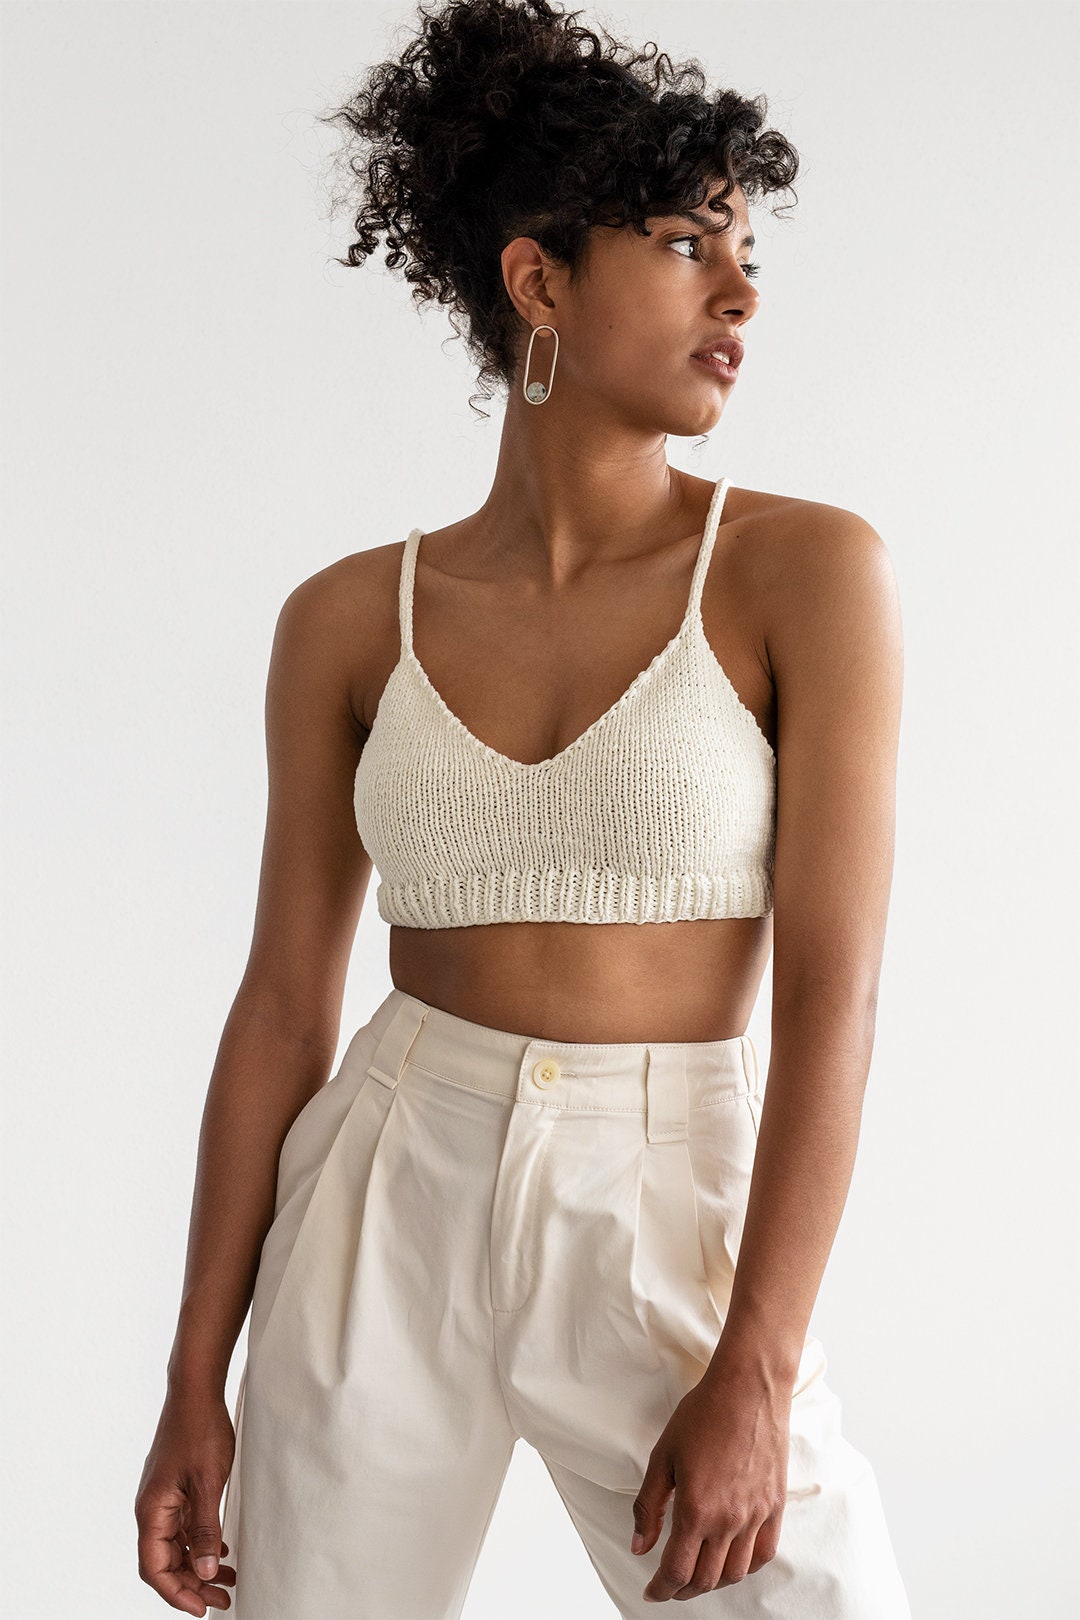 Hand Knit Bralette in Vanilla Scoop, Cotton Knit Bra, Fitted Yoga Top,  Minimal V Neck Crop Top, Soft Comfortable Bra, Cropped Womens Tops 